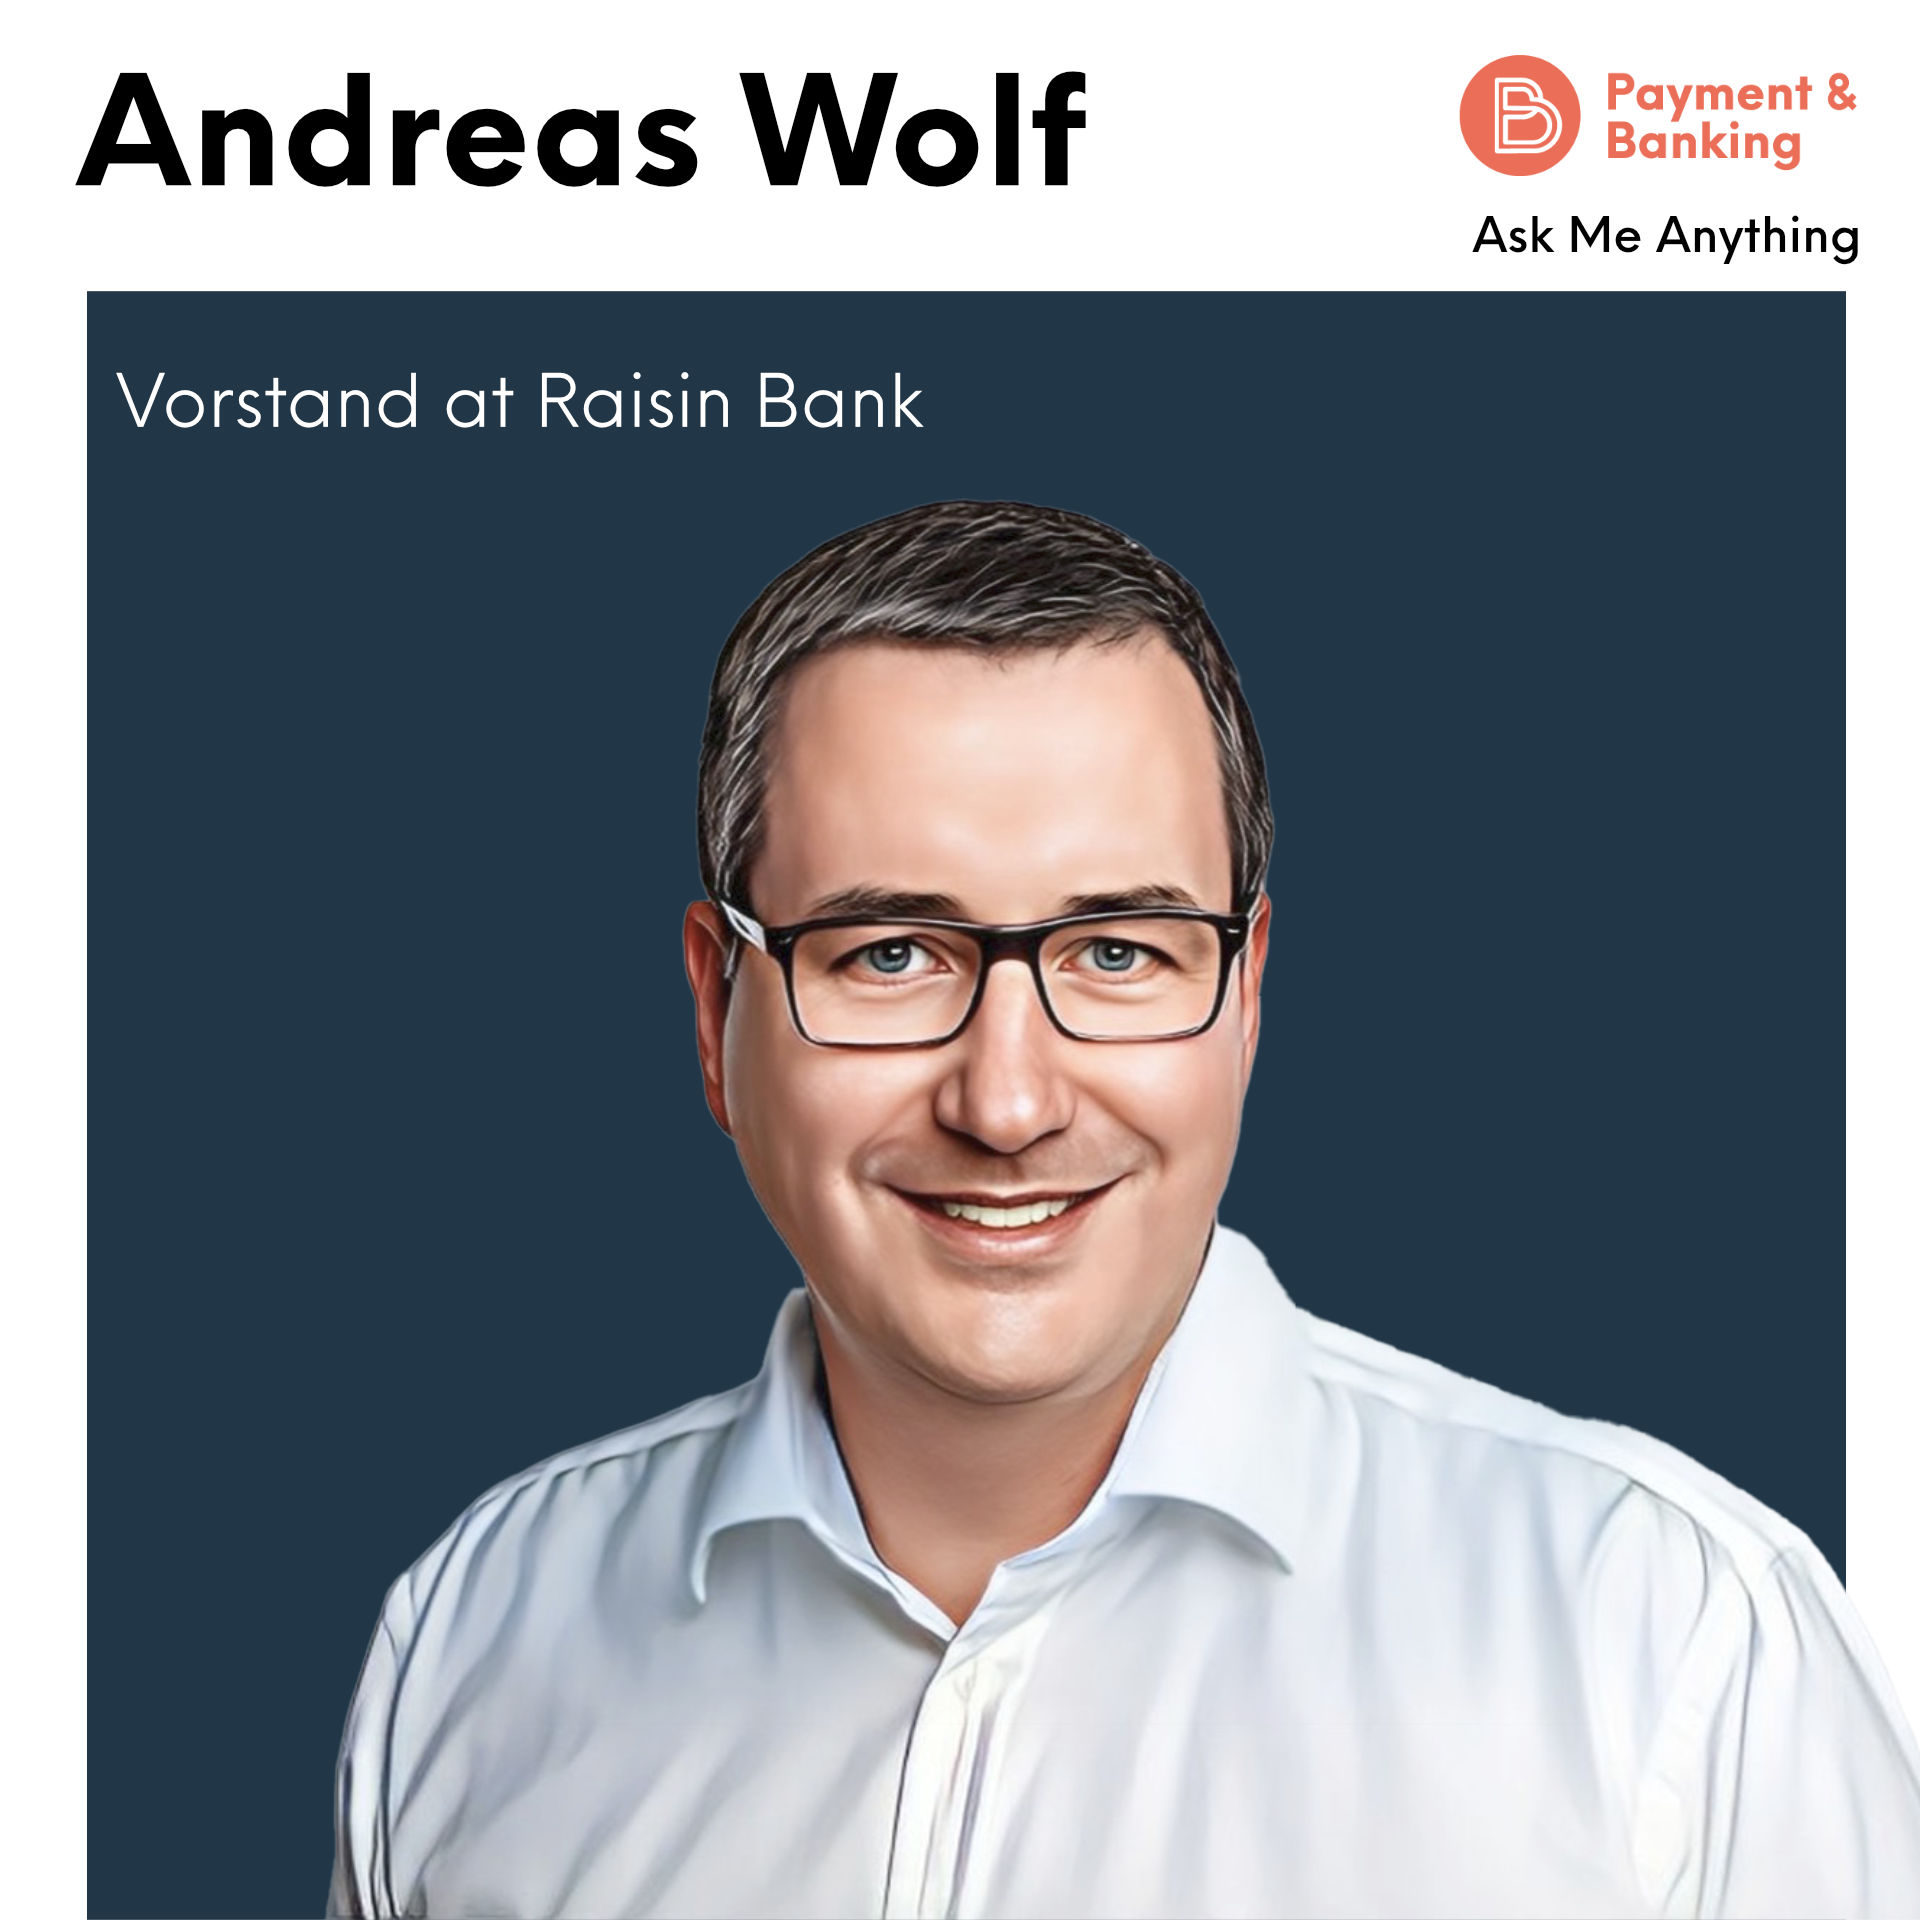 Ask Me Anything #49 - Andreas Wolf (Vorstand bei Raisin Bank)